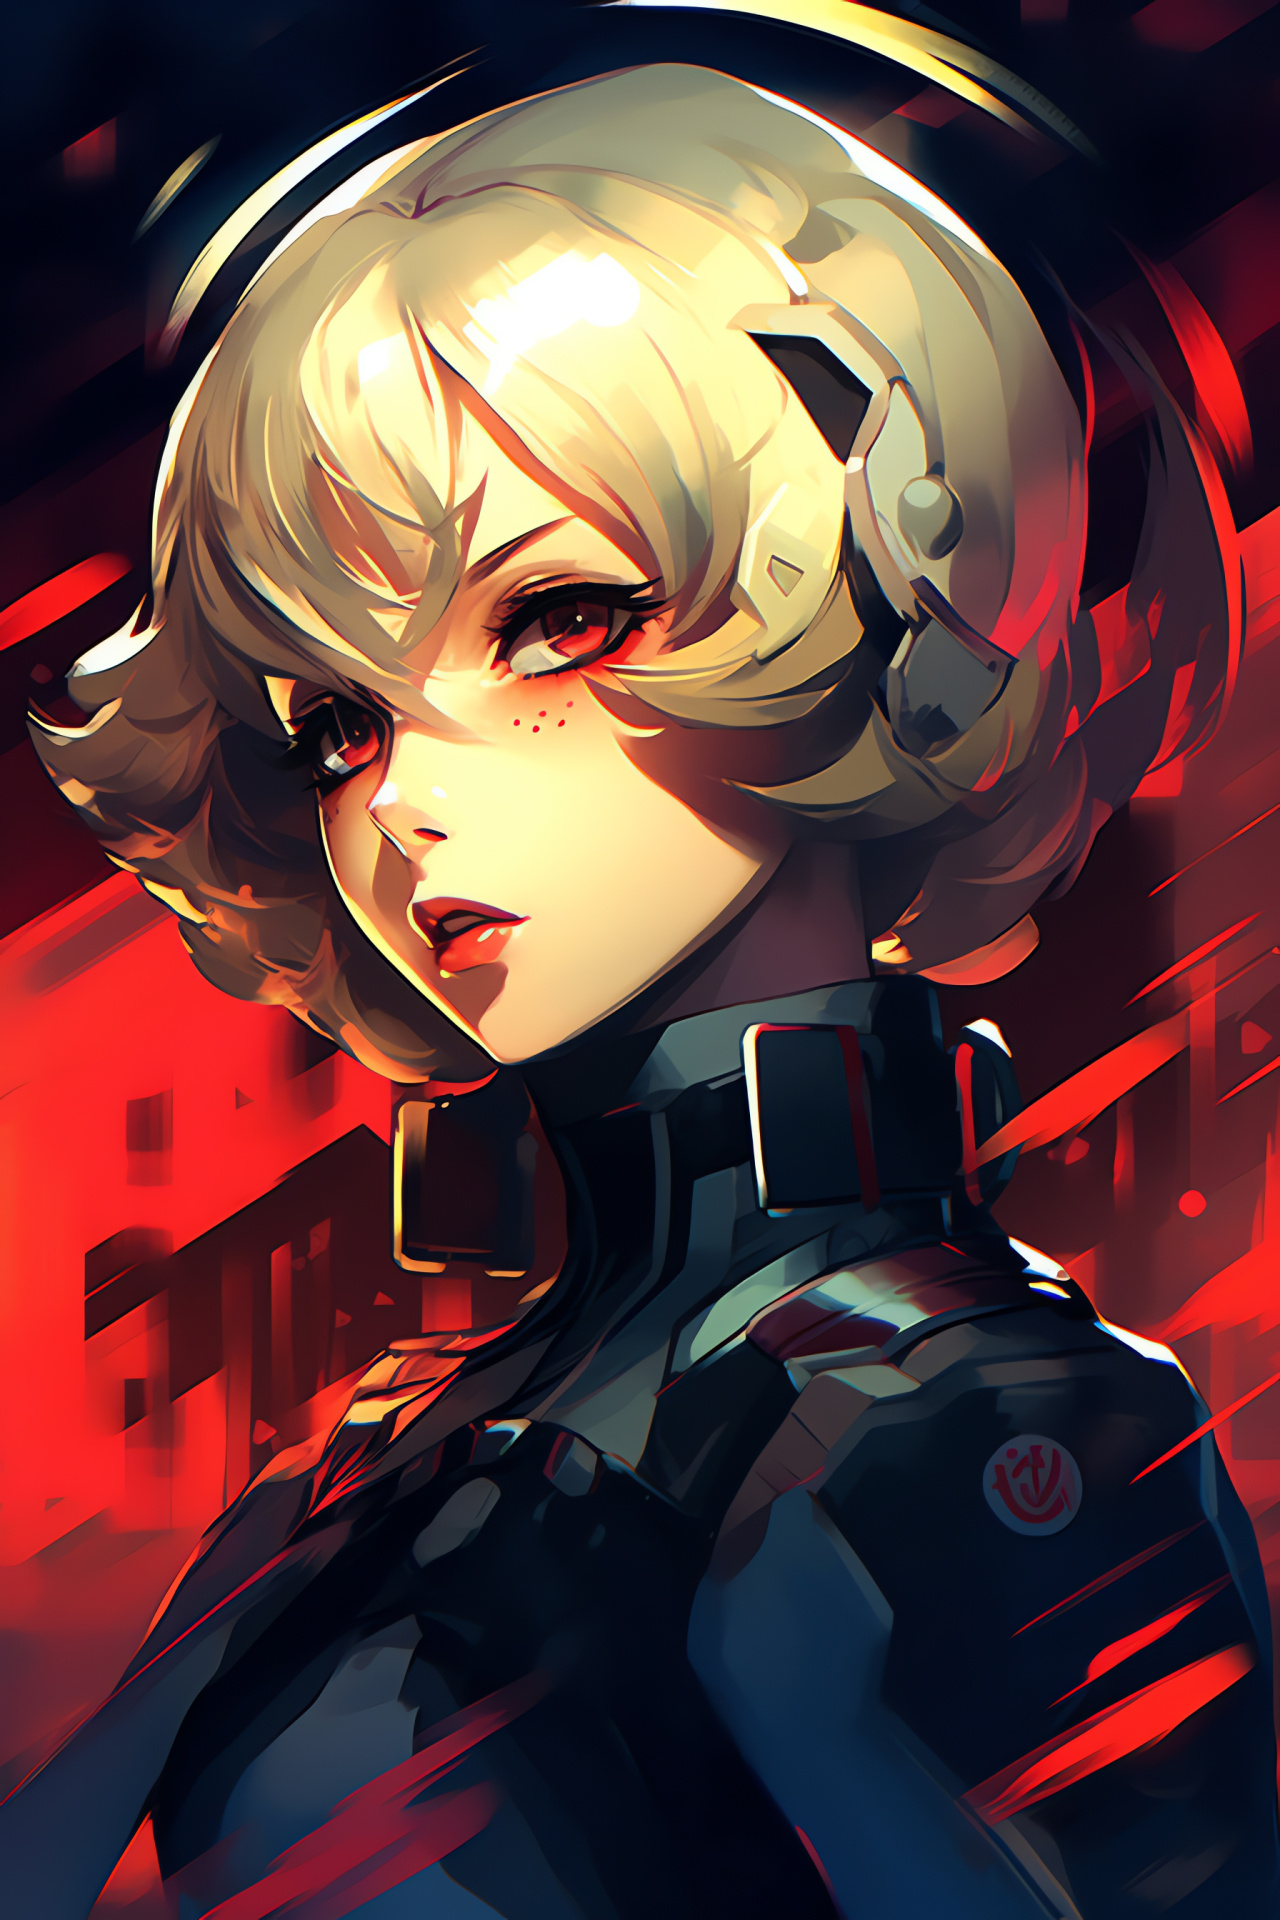 Persona 3 Aigis, Dorm interiors, Residence imagery, S.E.E.S hangout, Evening relaxation, HD Phone Image